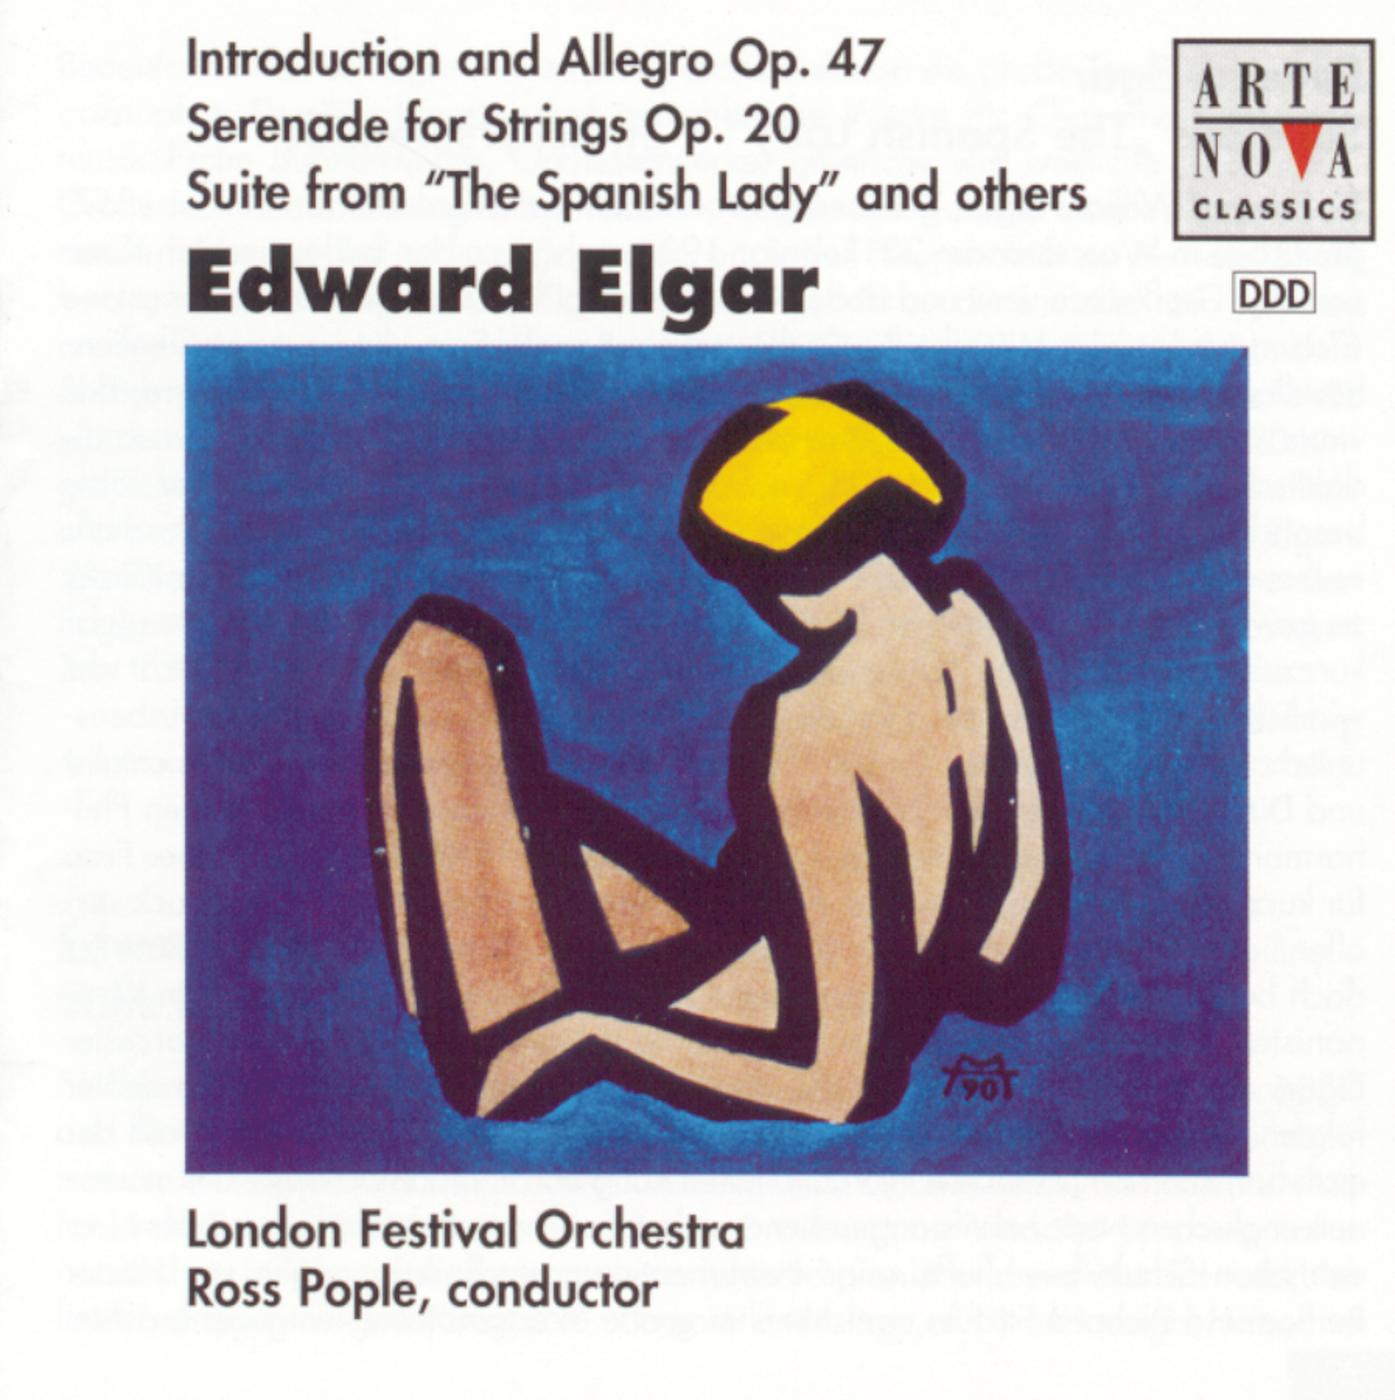 Introduction and Allegro Op. 47